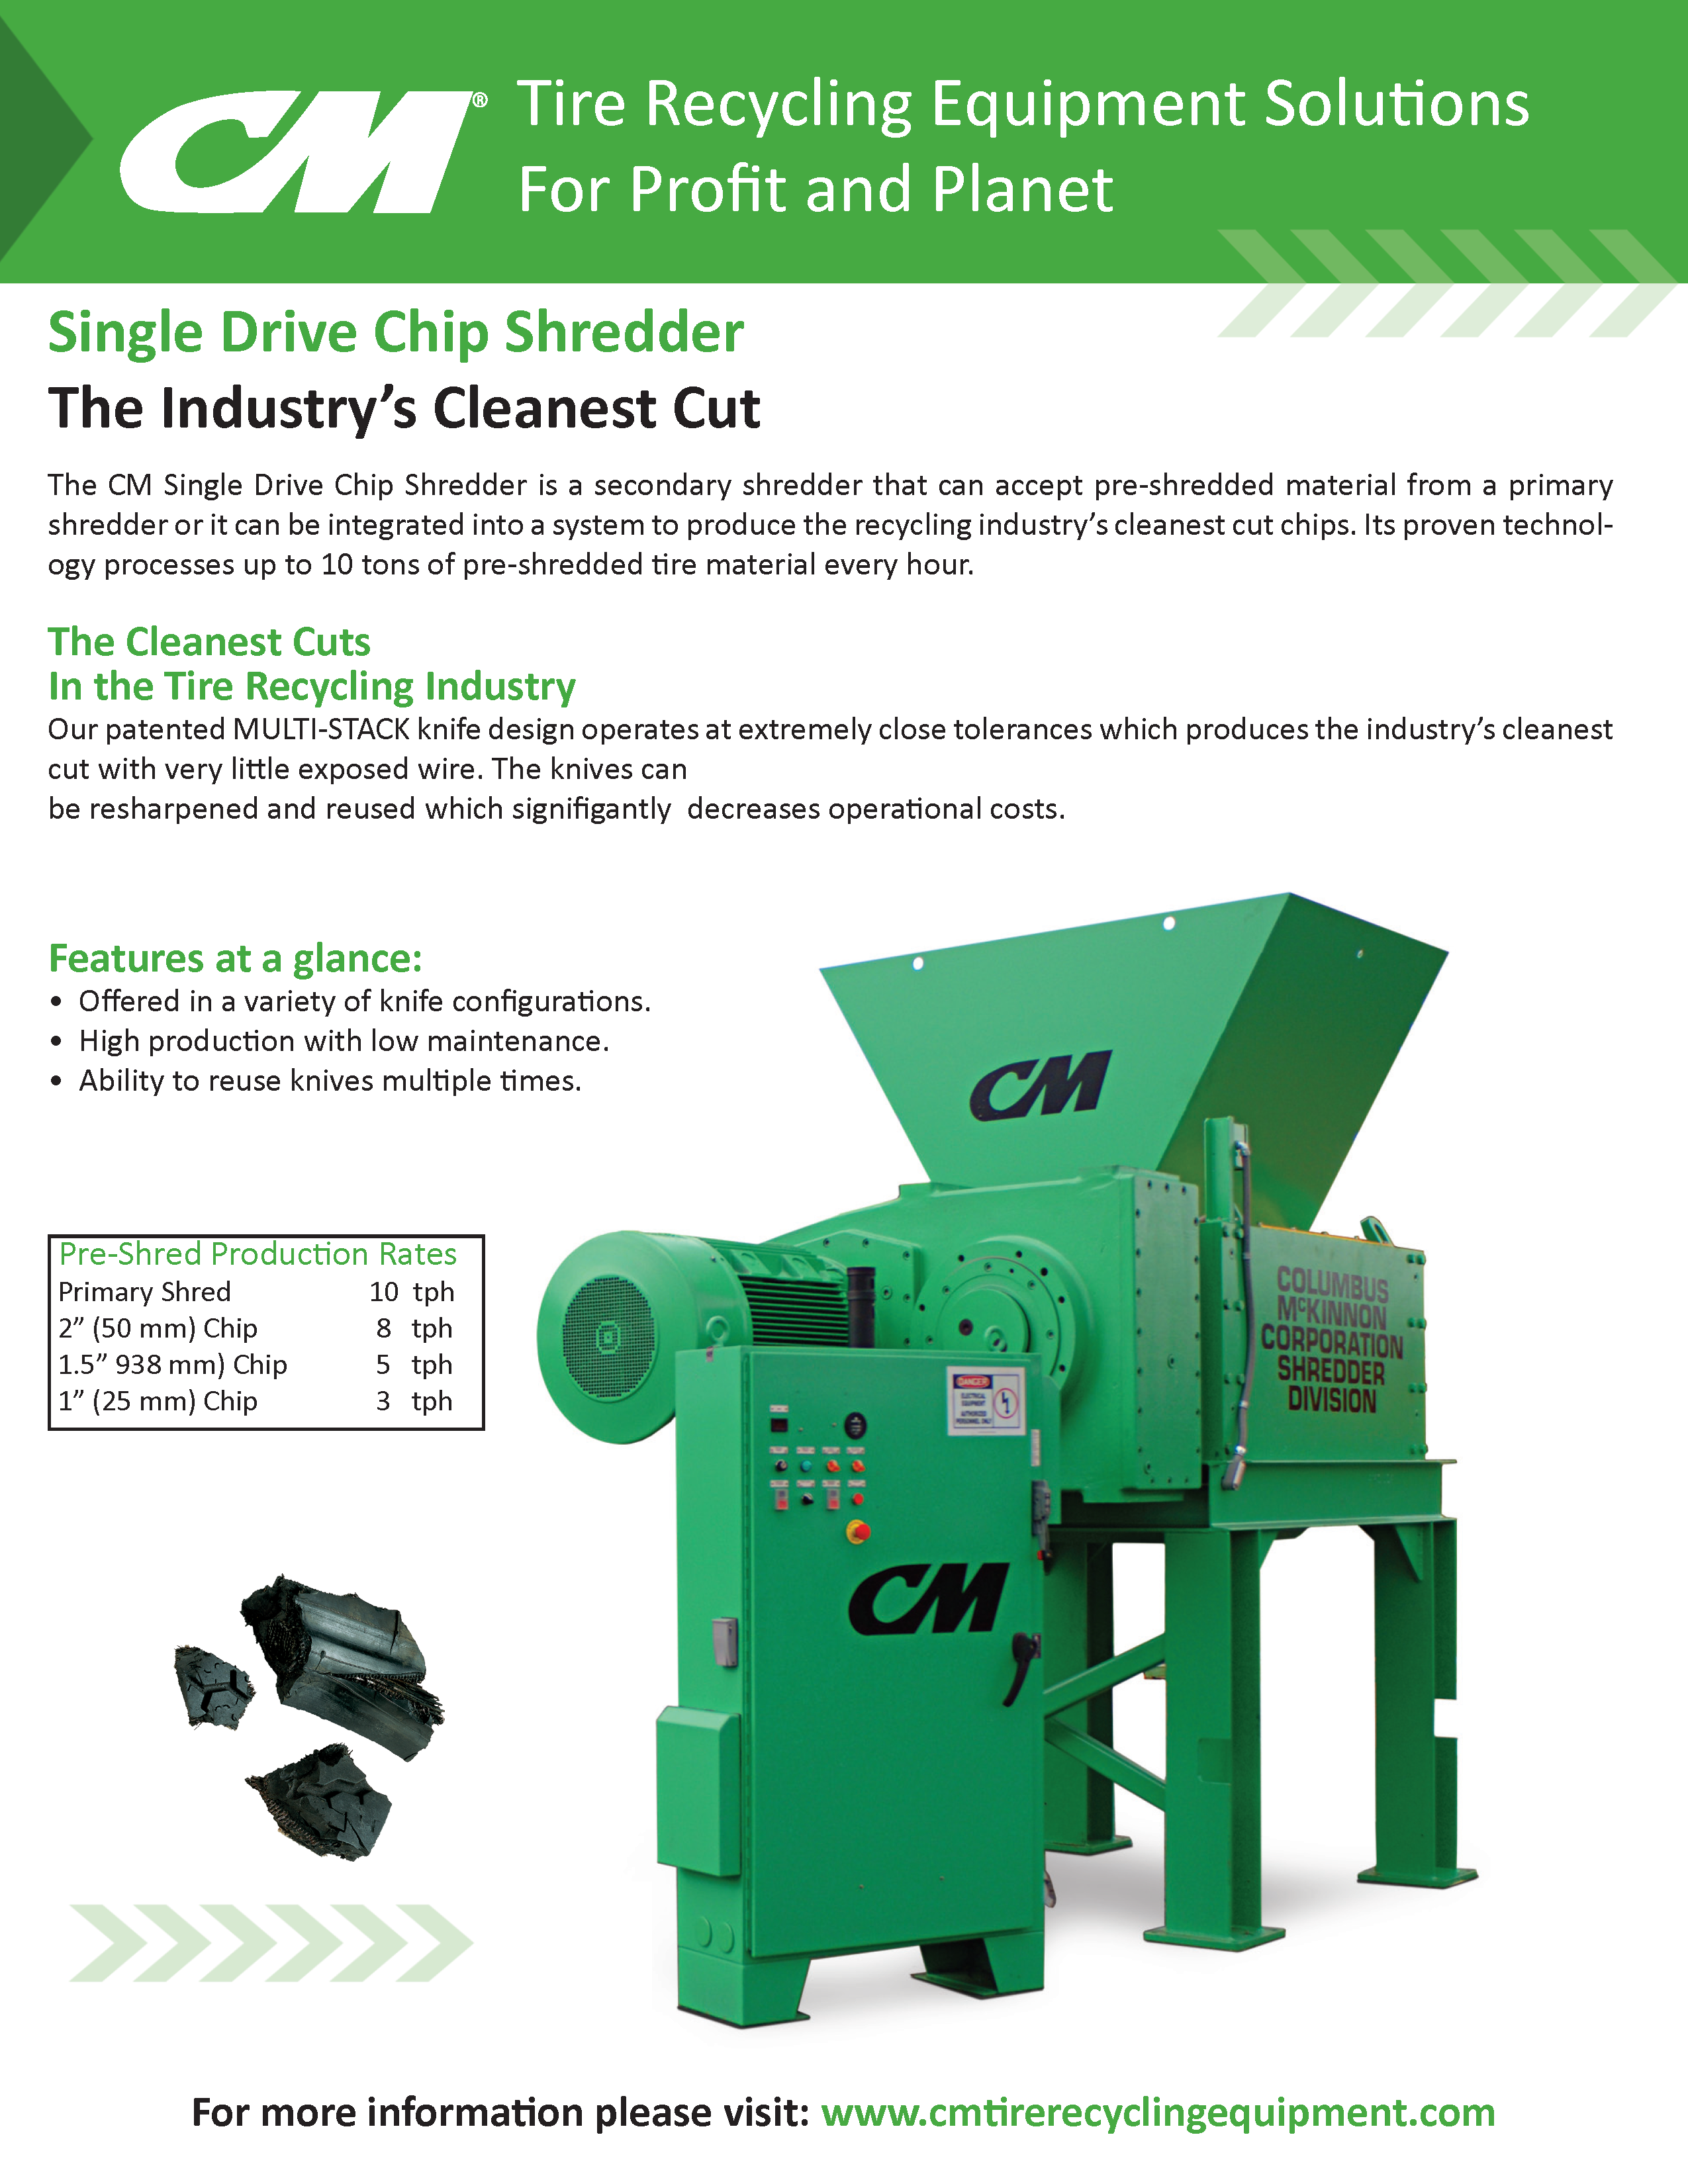 Learn more by viewing the CM Single Drive Chip Shredder Brochure